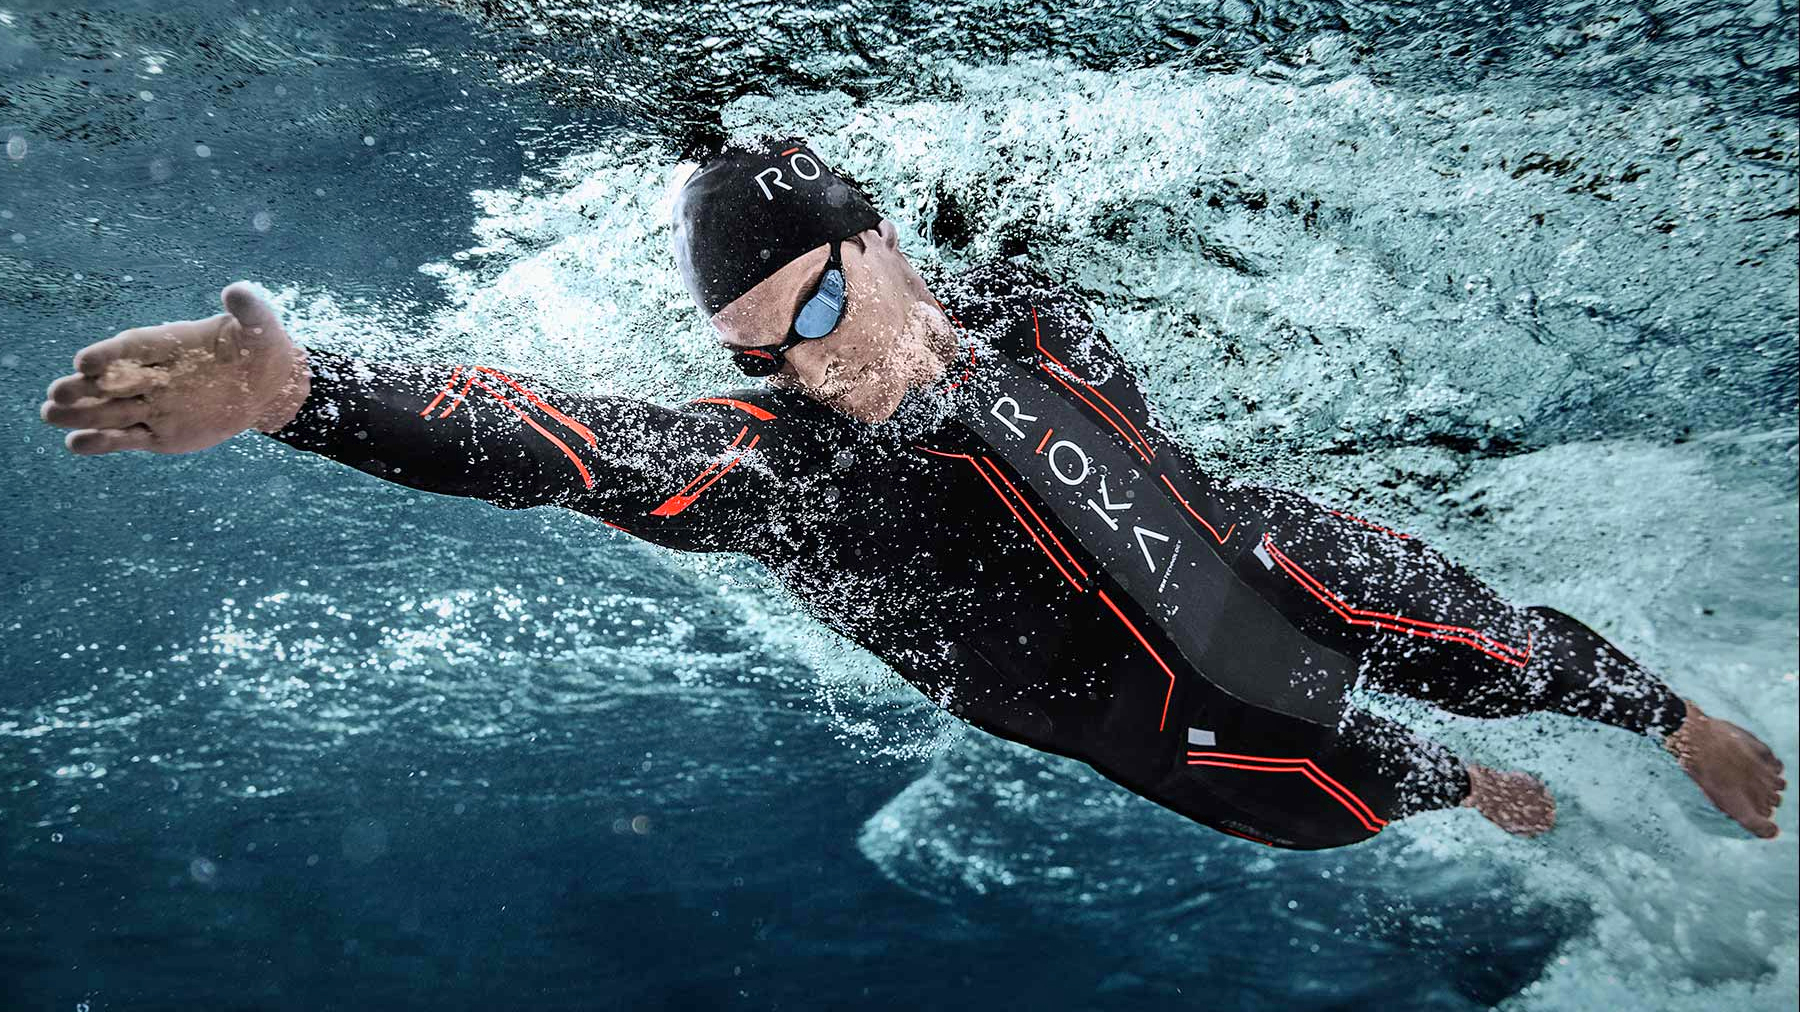 This $1200 Wetsuit Promises To Make You The Fastest Swimmer